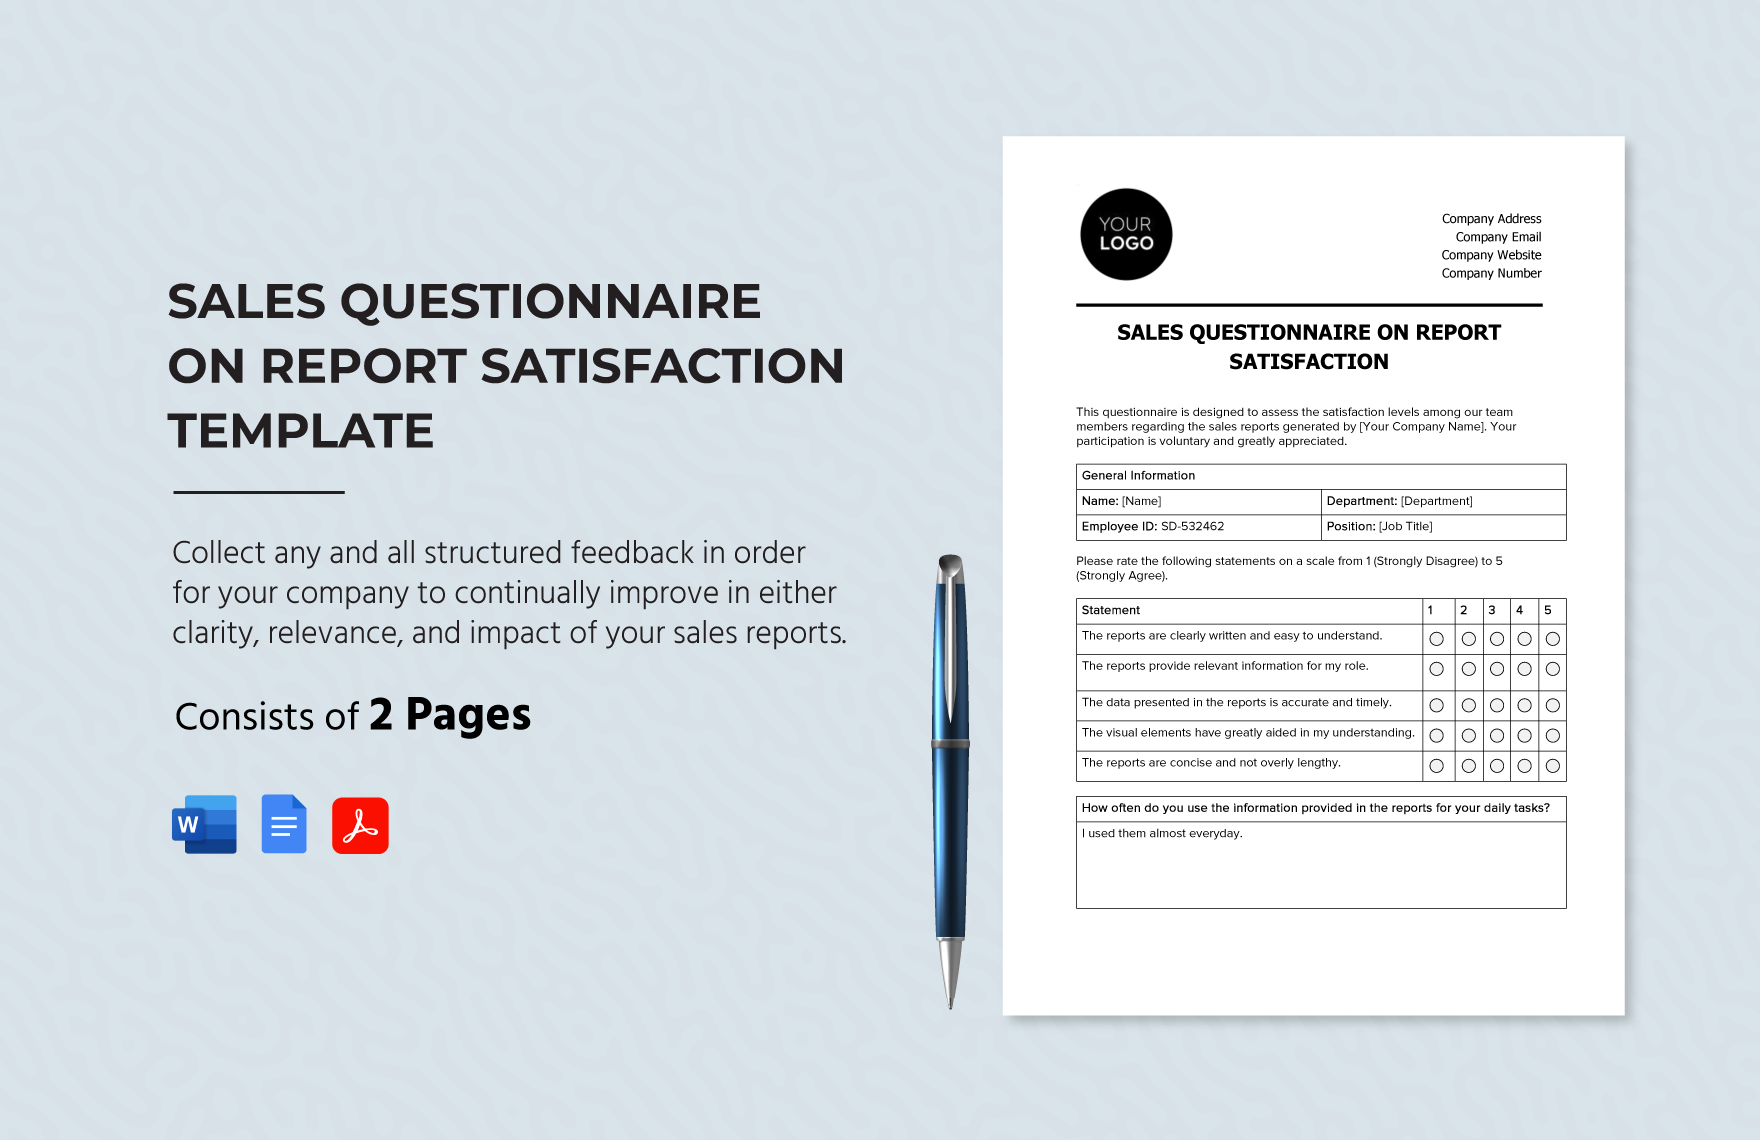 Sales Questionnaire on Report Satisfaction Template